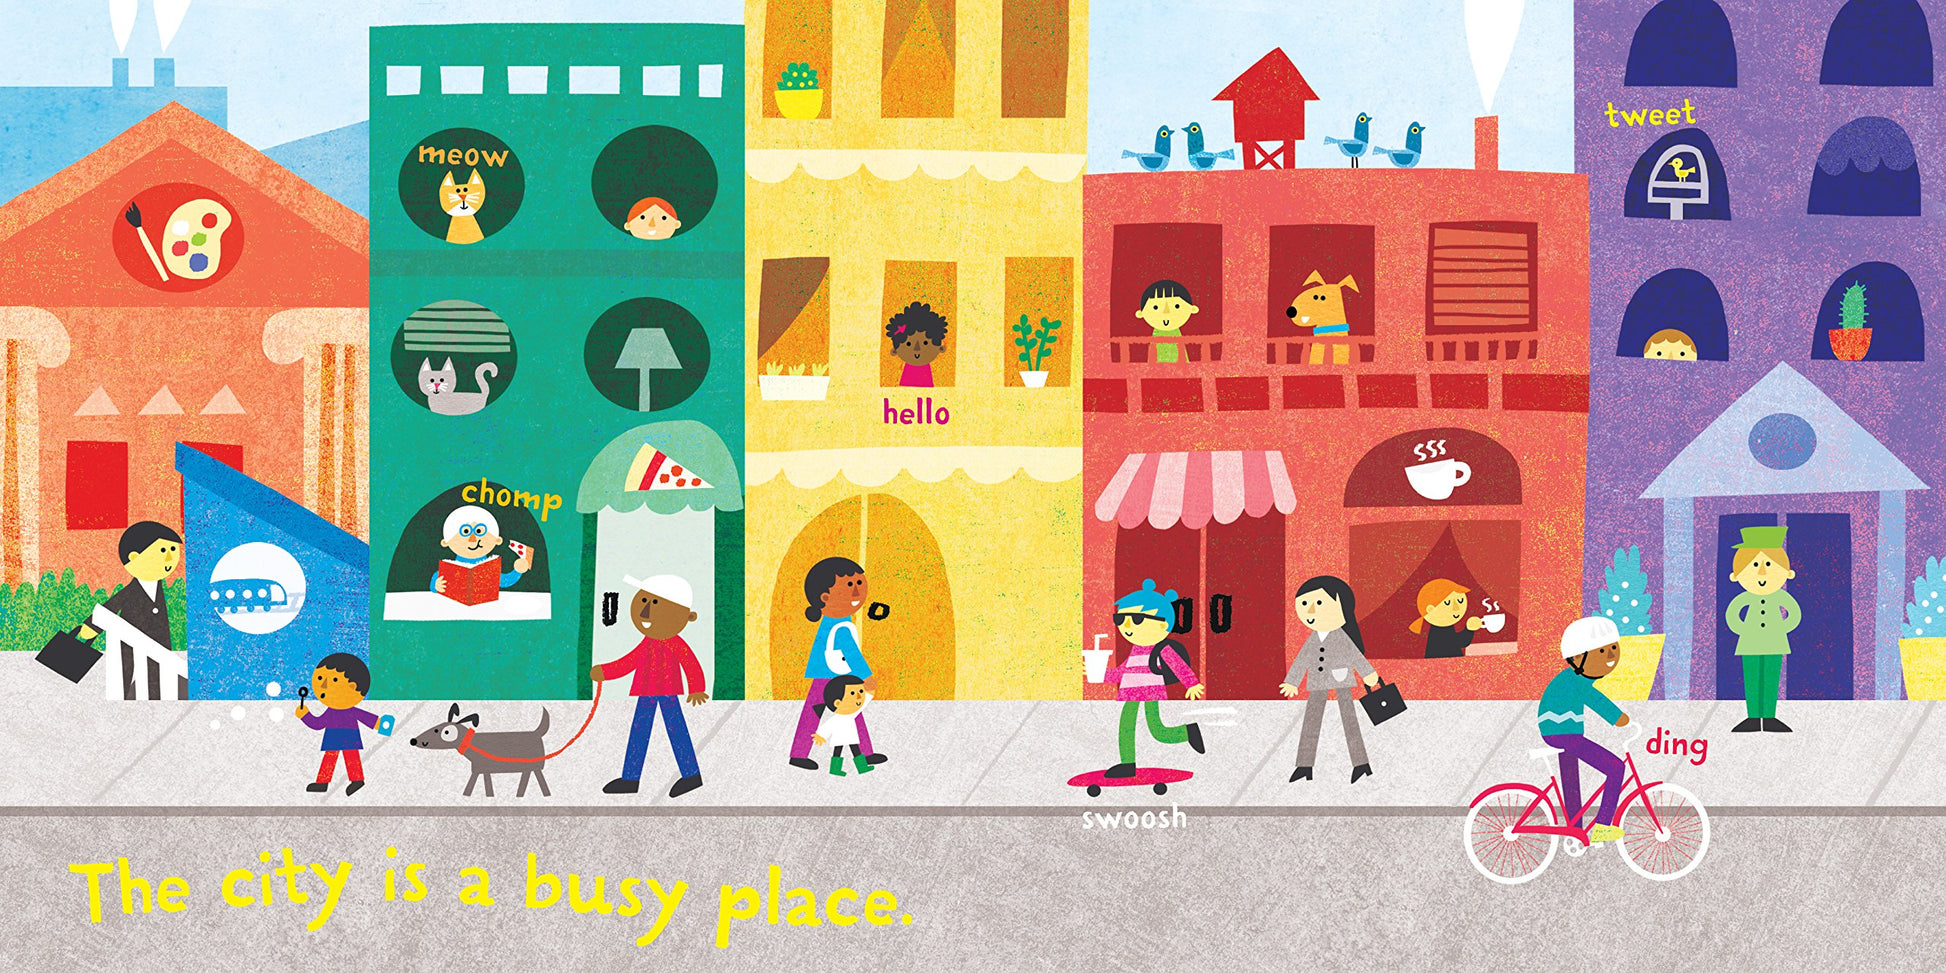 a set of pages with illustration of city buildings in bright colors and people walking on the side walks in front of them, and text